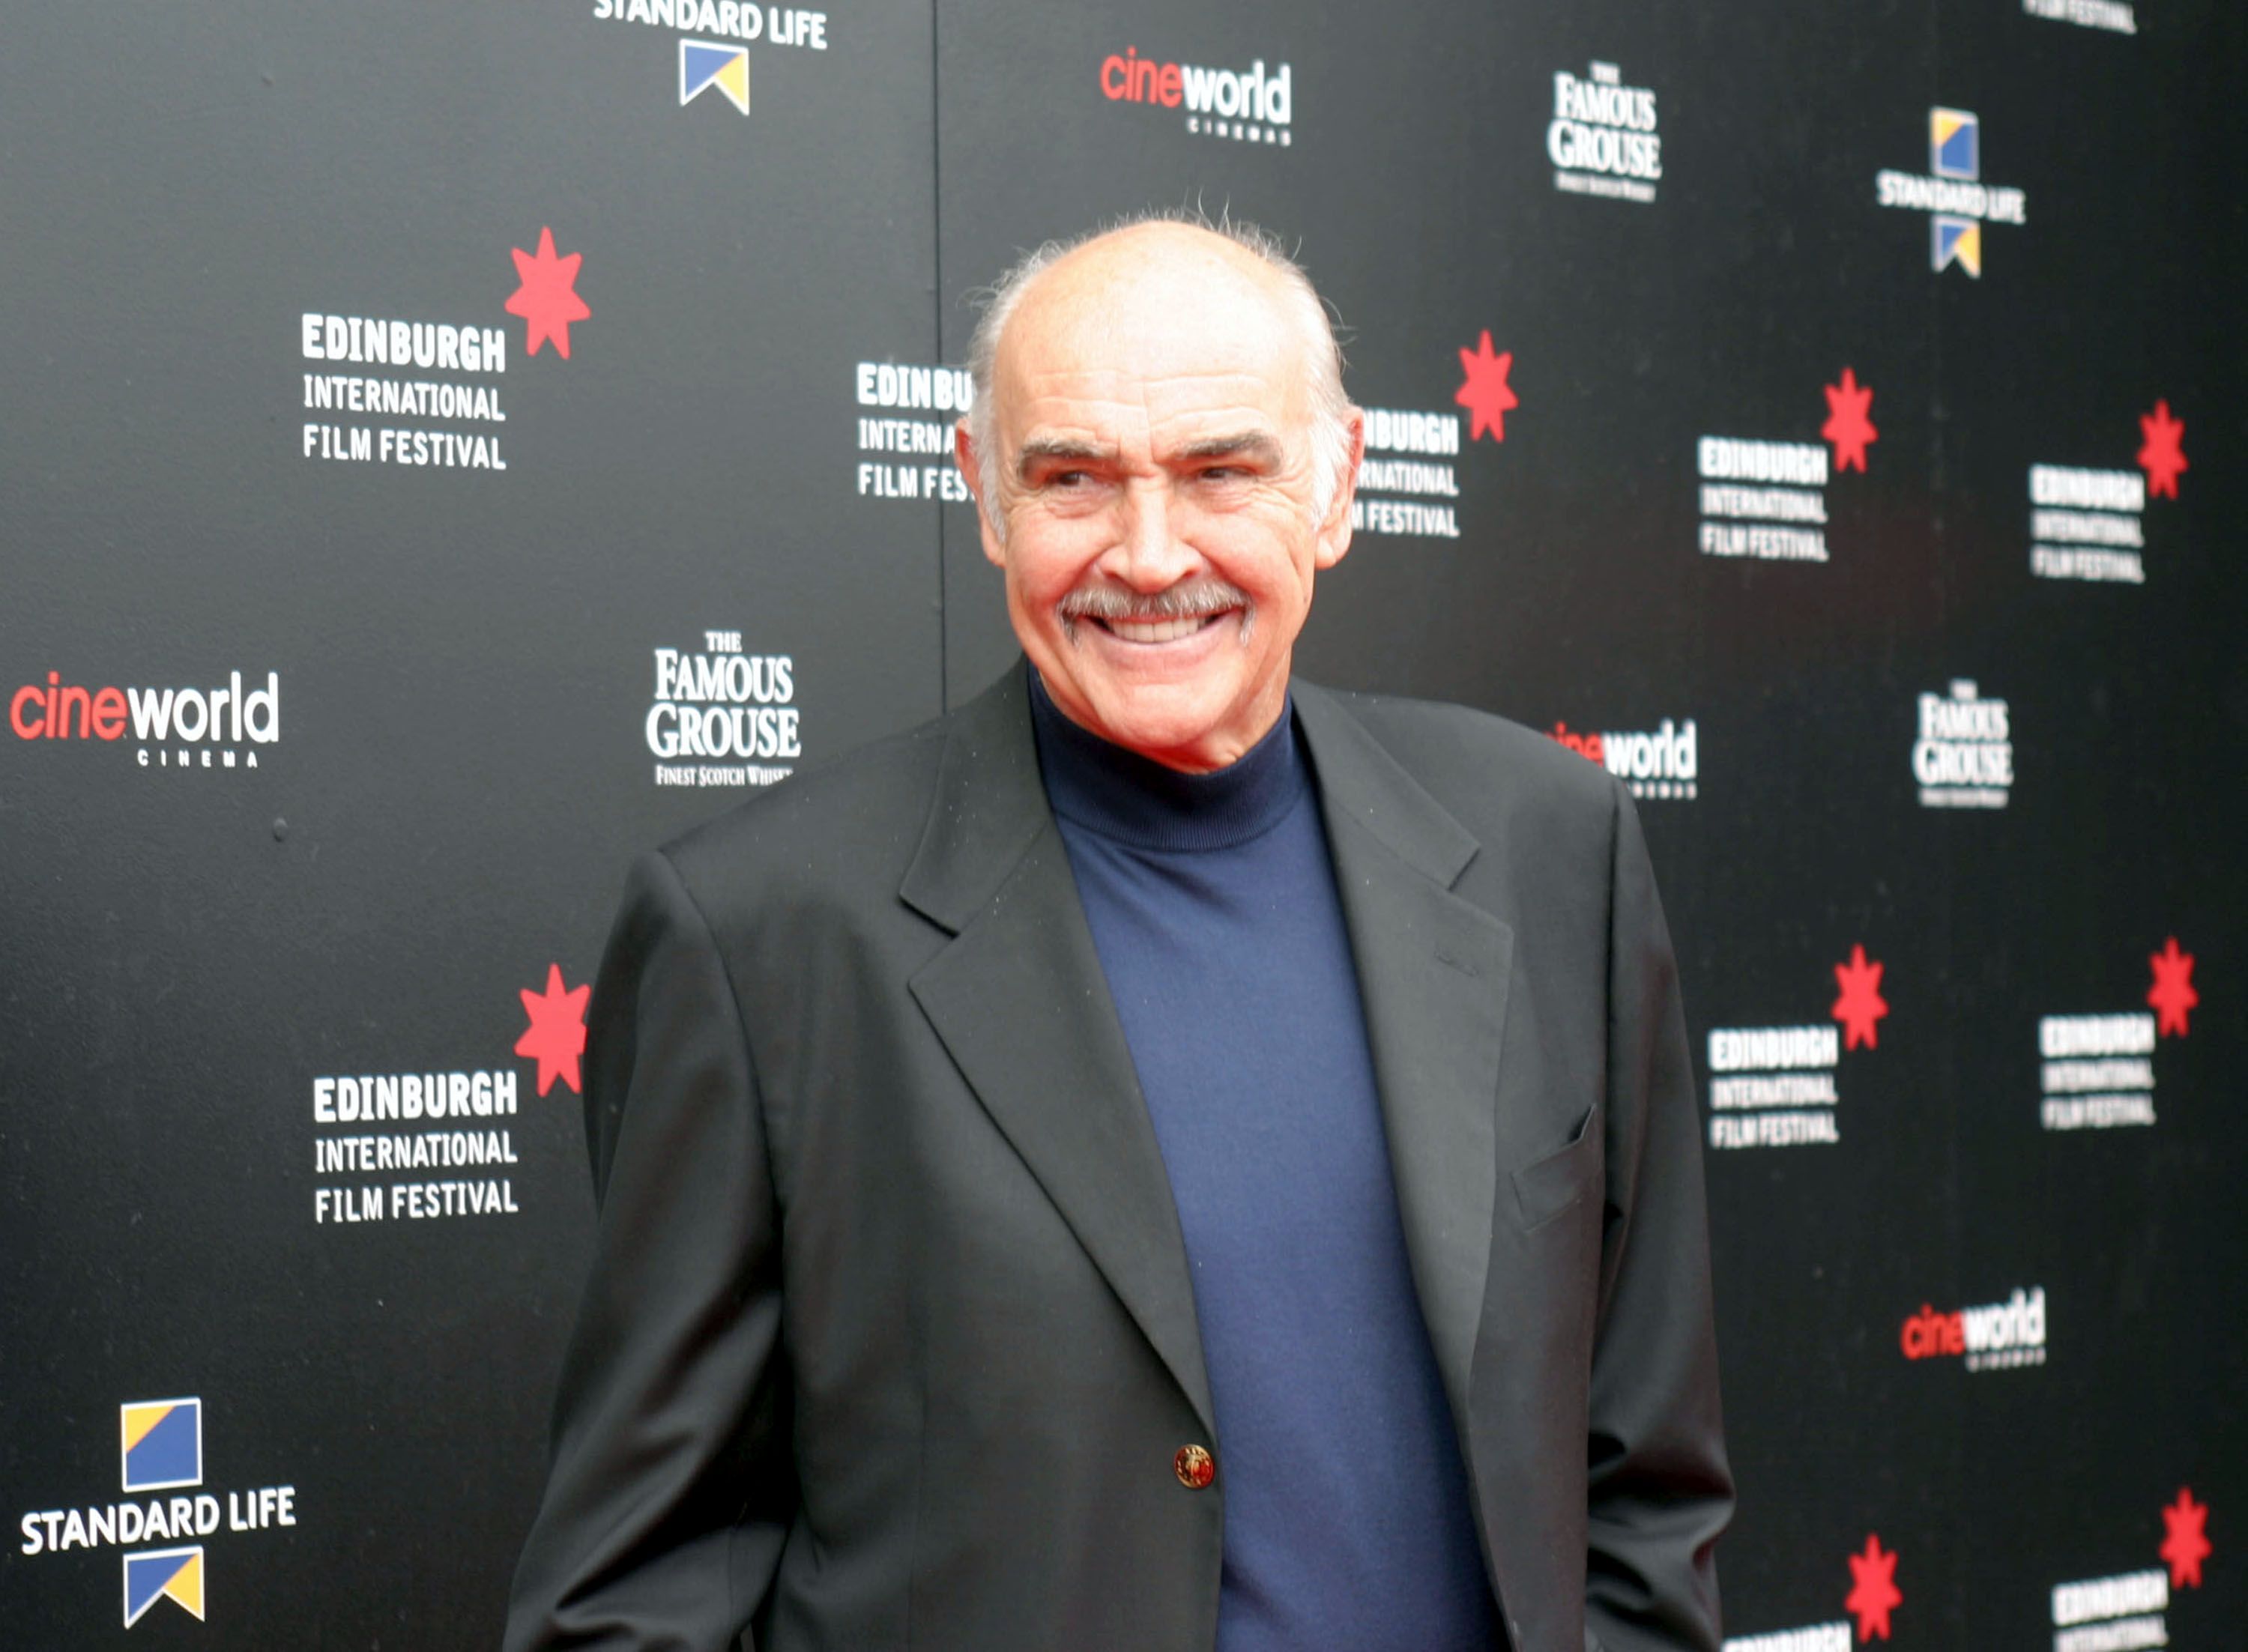 Sean Connery during the Sir Sean Connery Attends the Edinburgh International Film Festival at Cineworld in Edinburgh, Scotland, Great Britain. | Source: Getty Images